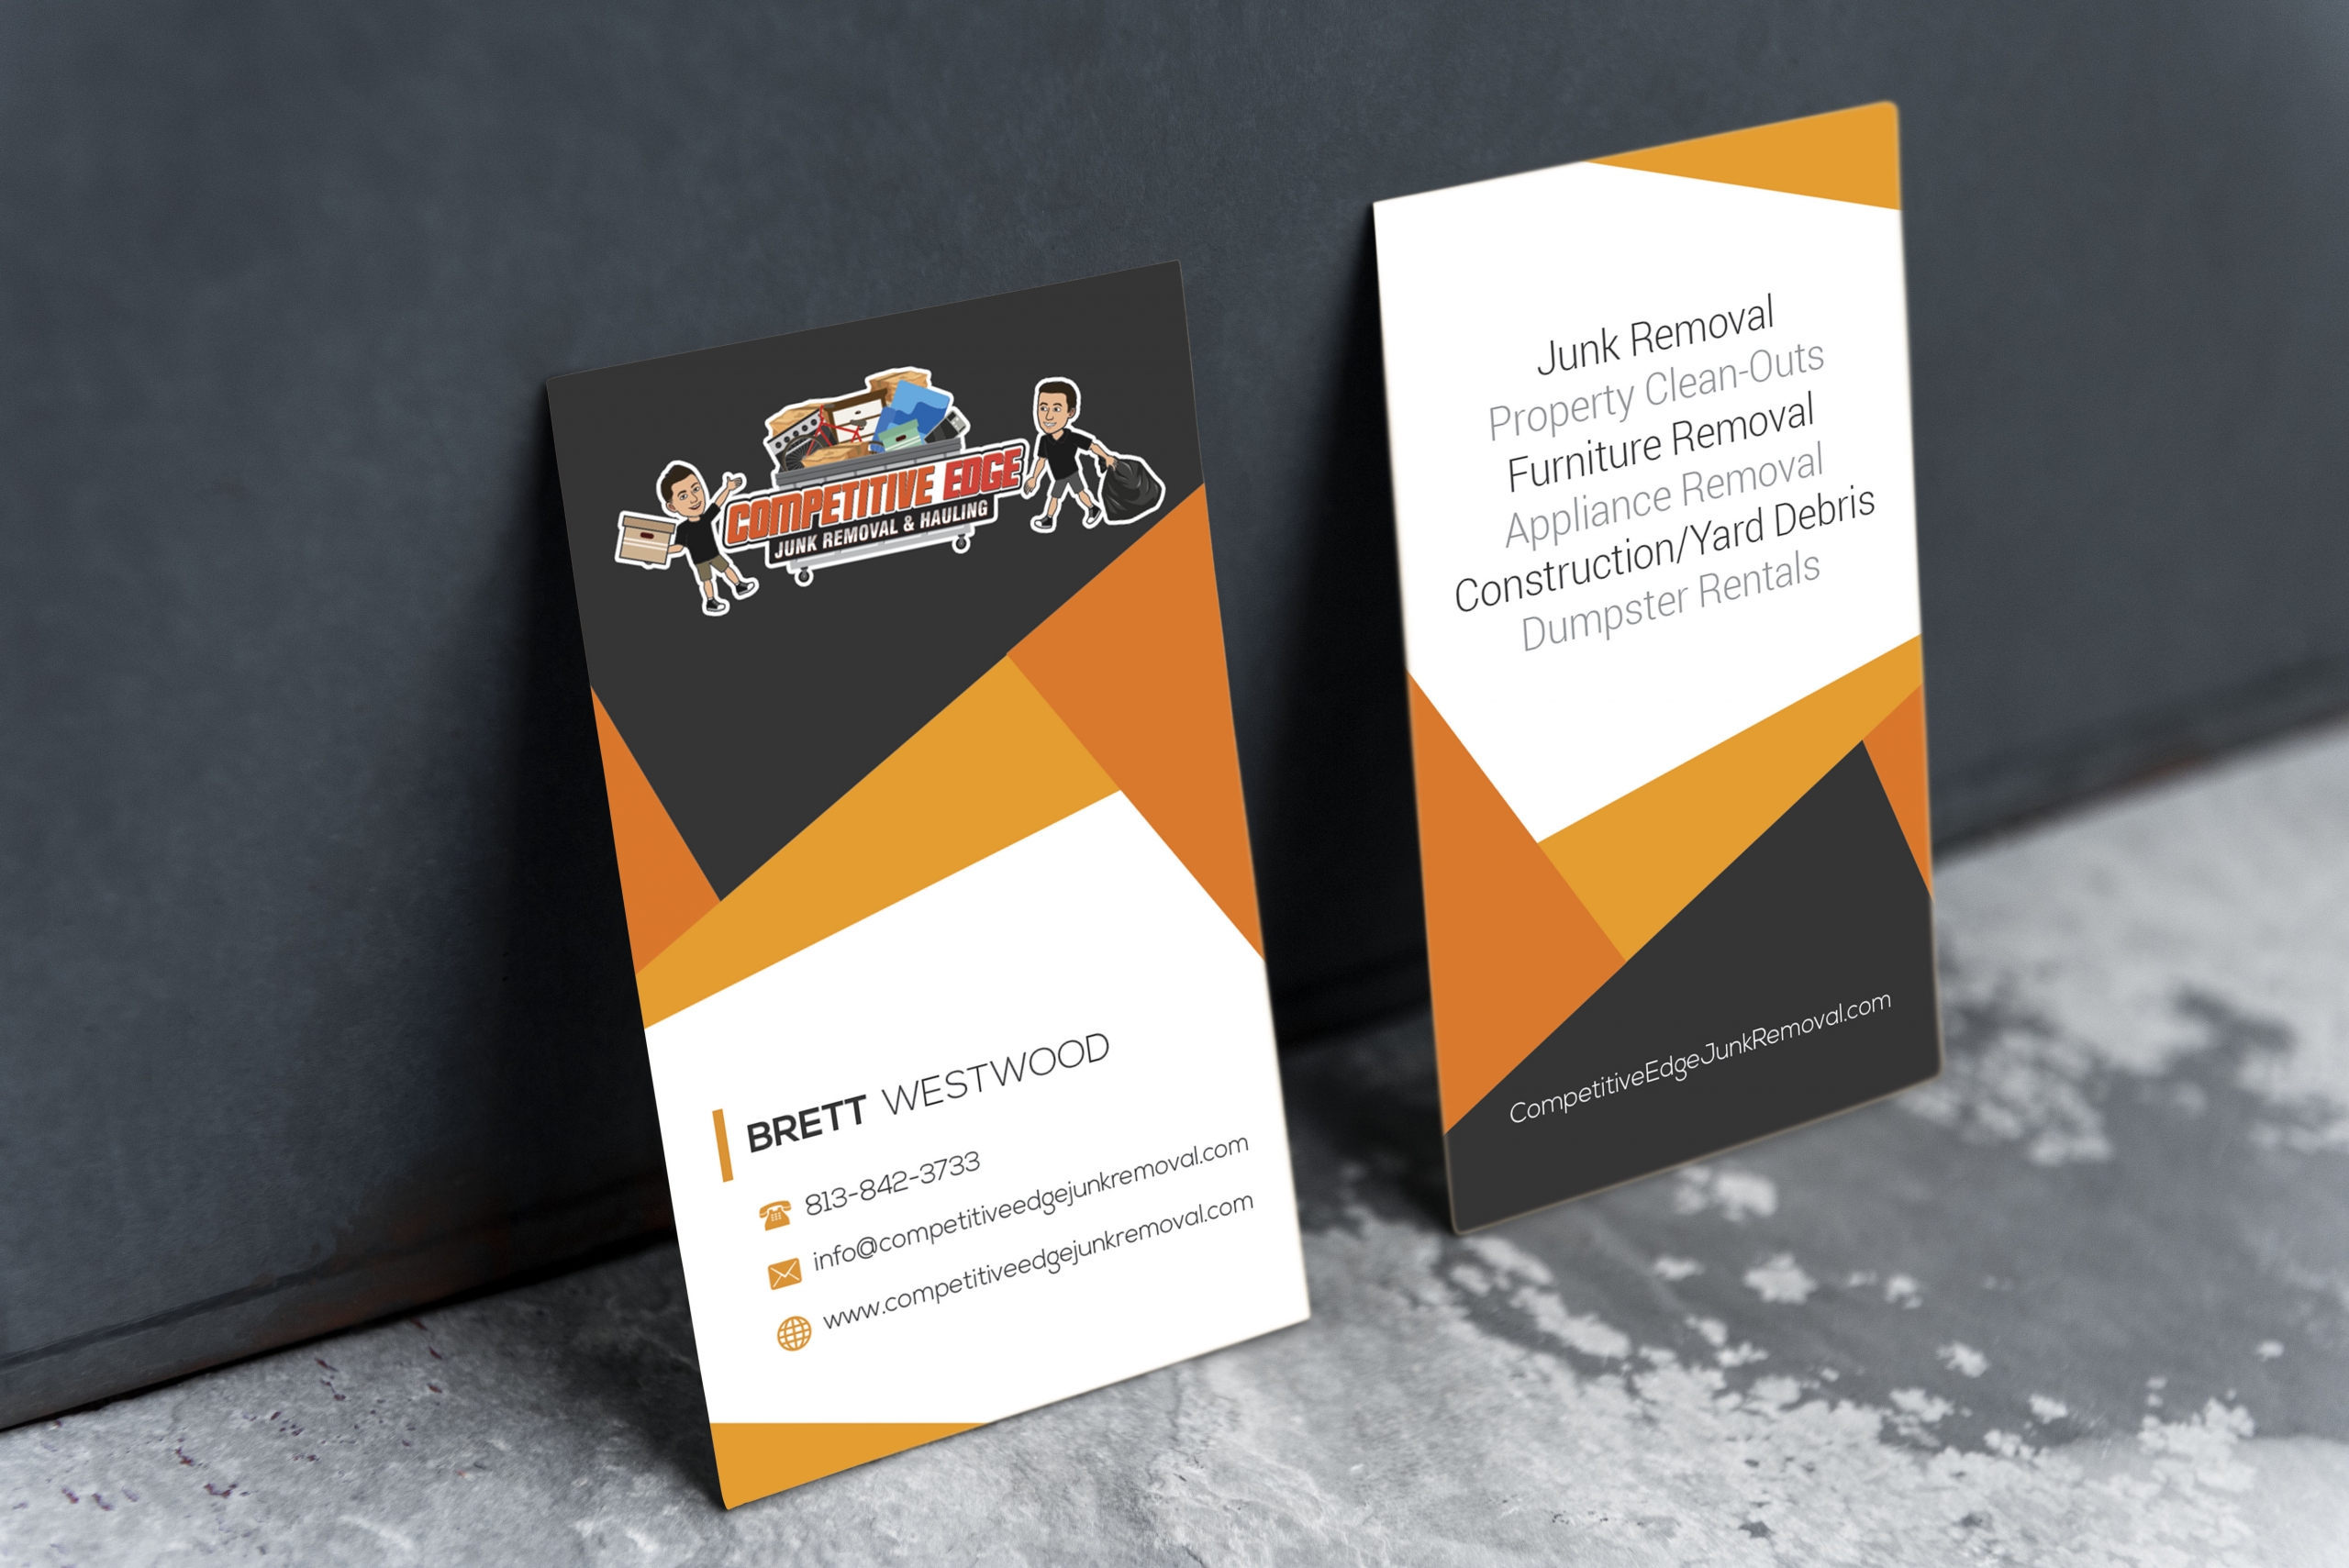 Competitive Edge Business Card